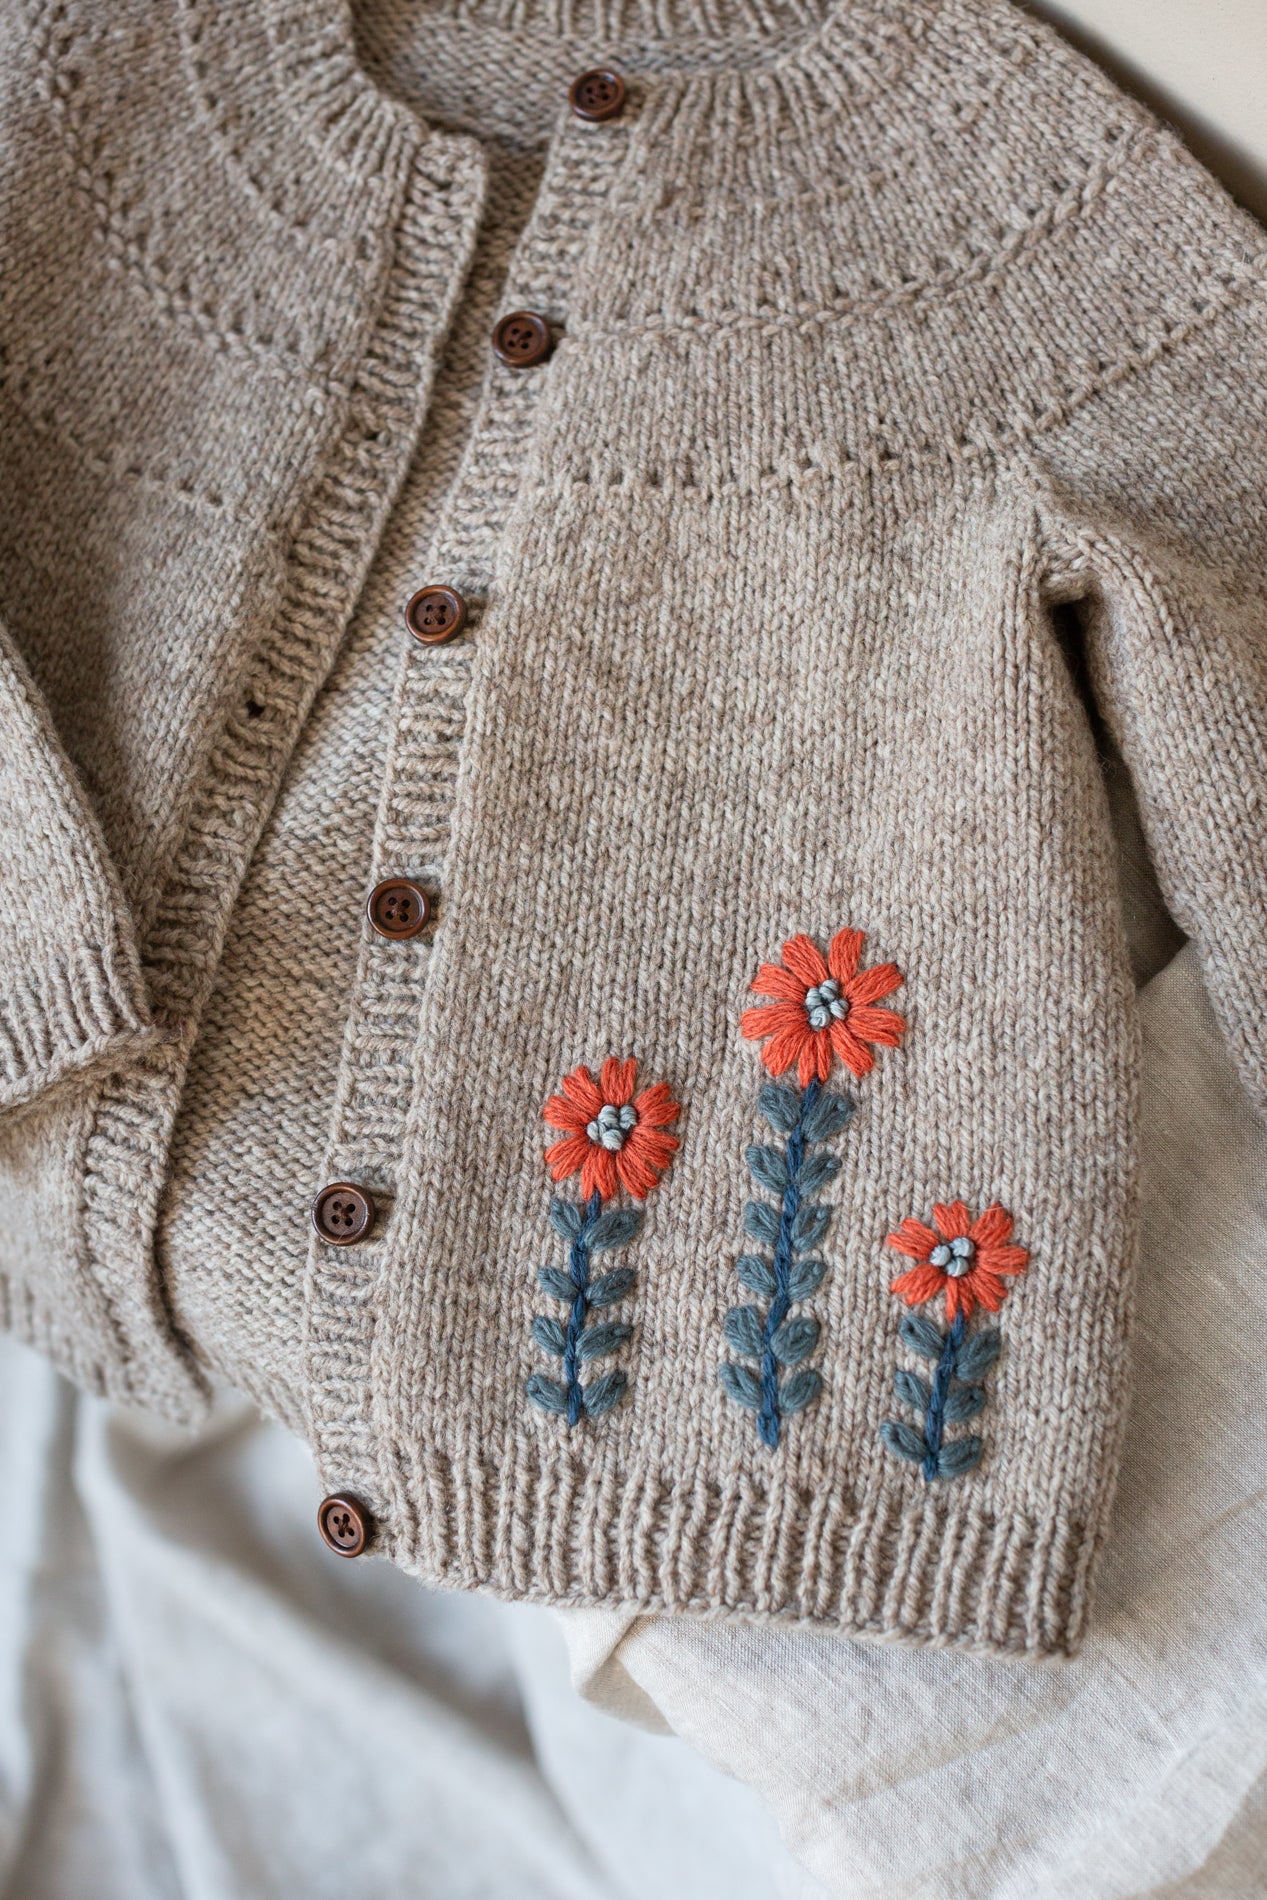 Embroidery on knits daisy